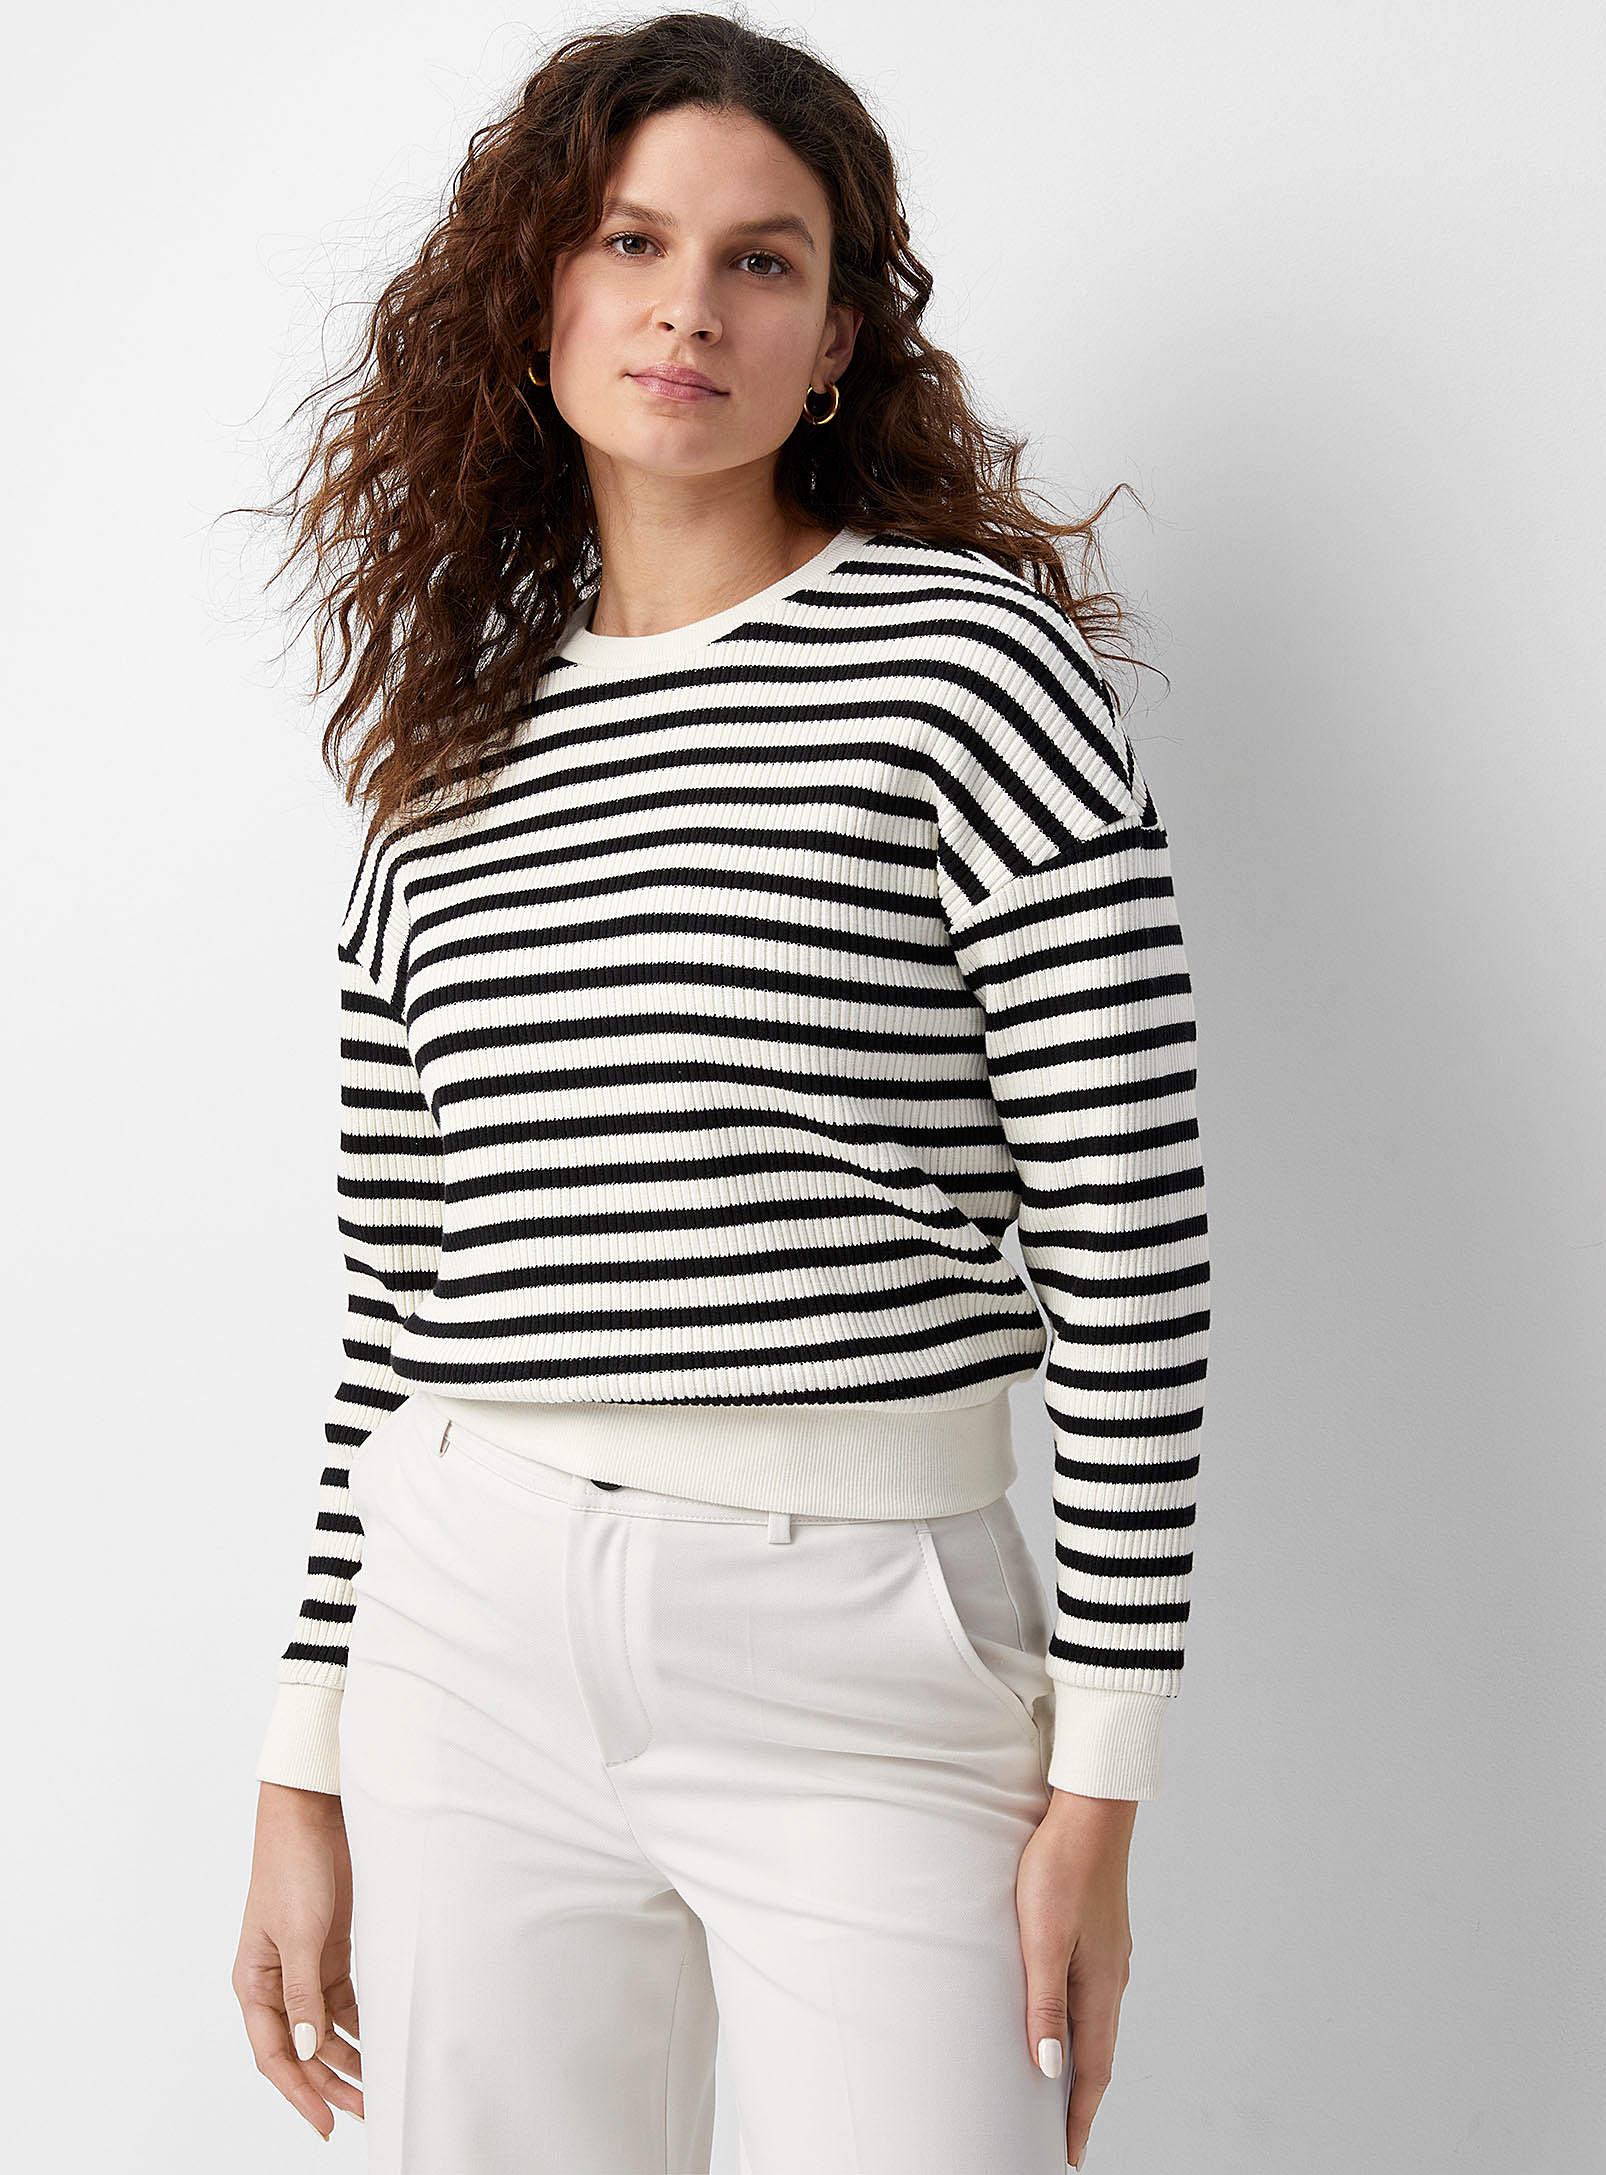 Contemporaine Contrasting Stripe Ribbed Sweatshirt In Black And White